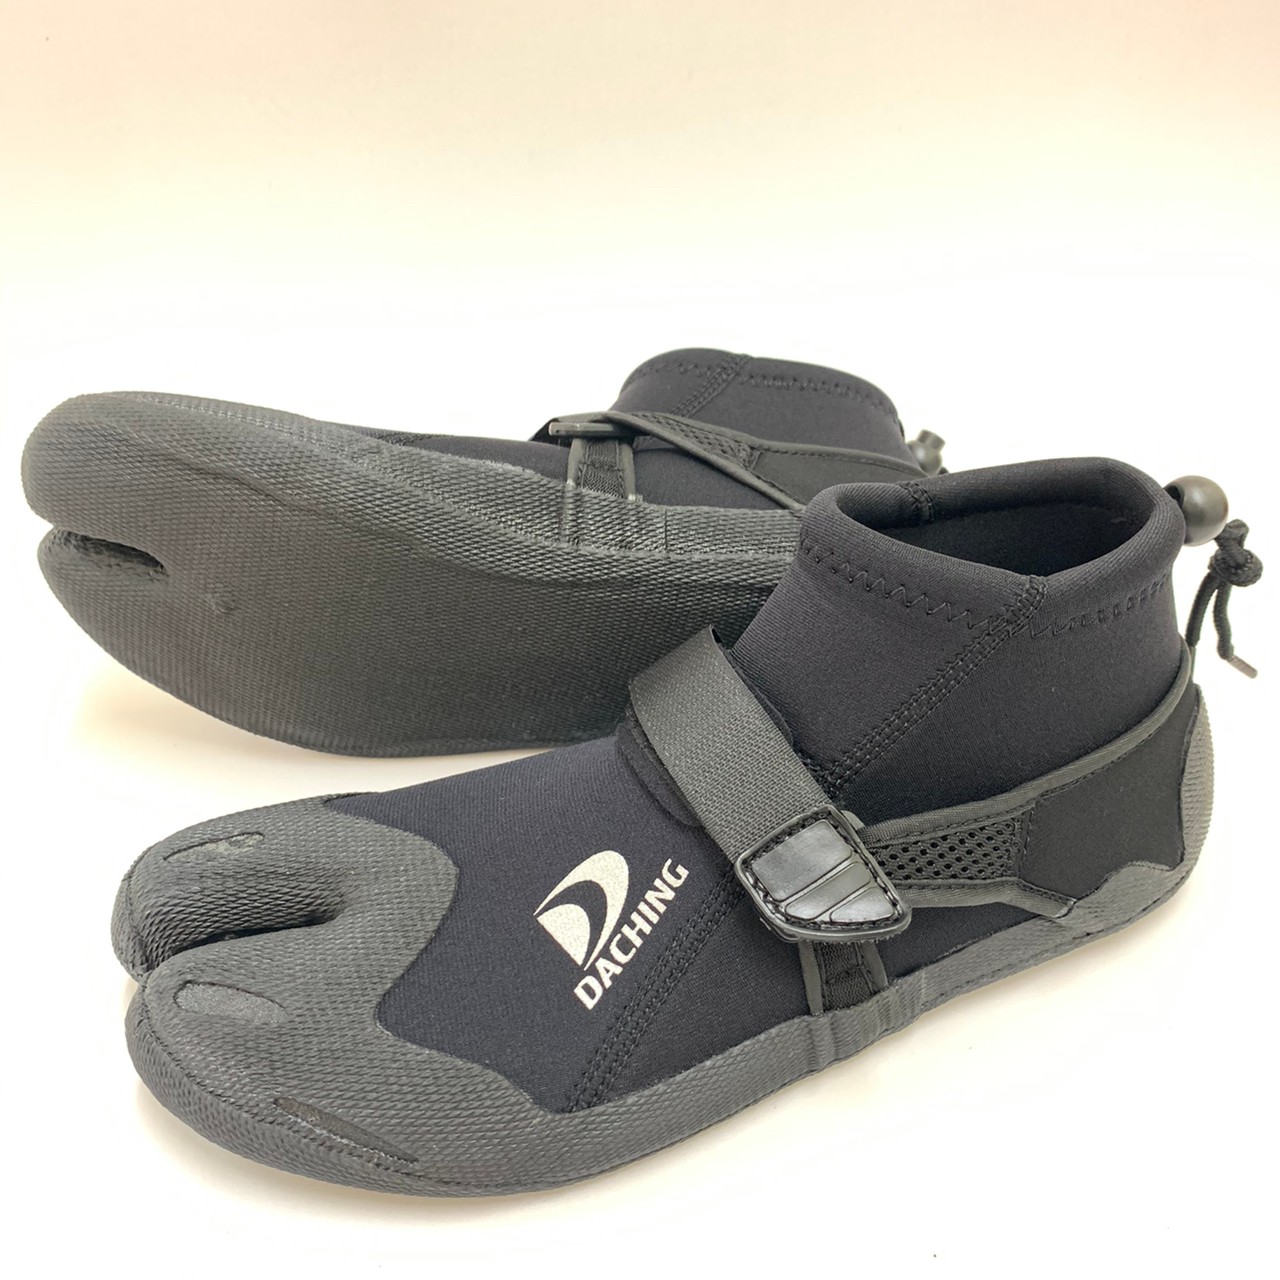 Water Sport Shoes